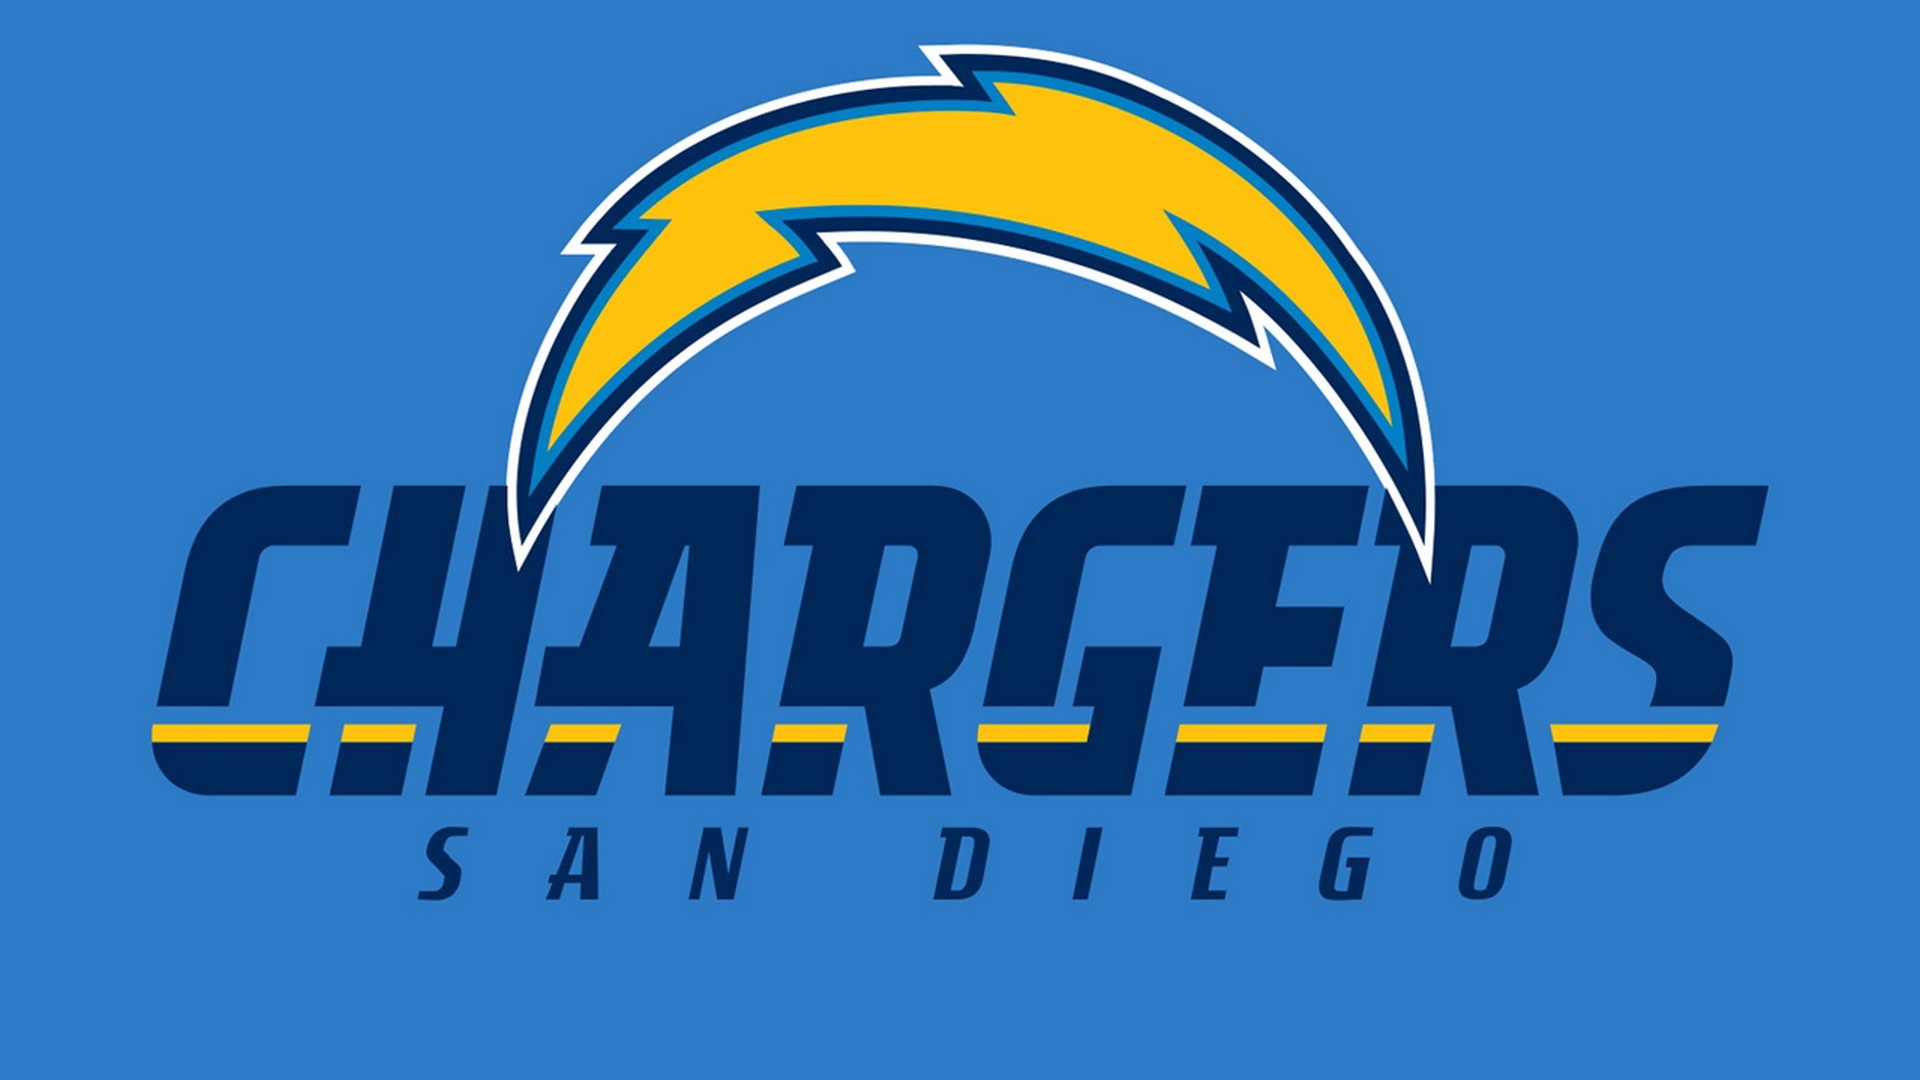 Los Angeles Chargers HD Wallpapers With Resolution 1920X1080 pixel. You can make this wallpaper for your Mac or Windows Desktop Background, iPhone, Android or Tablet and another Smartphone device for free